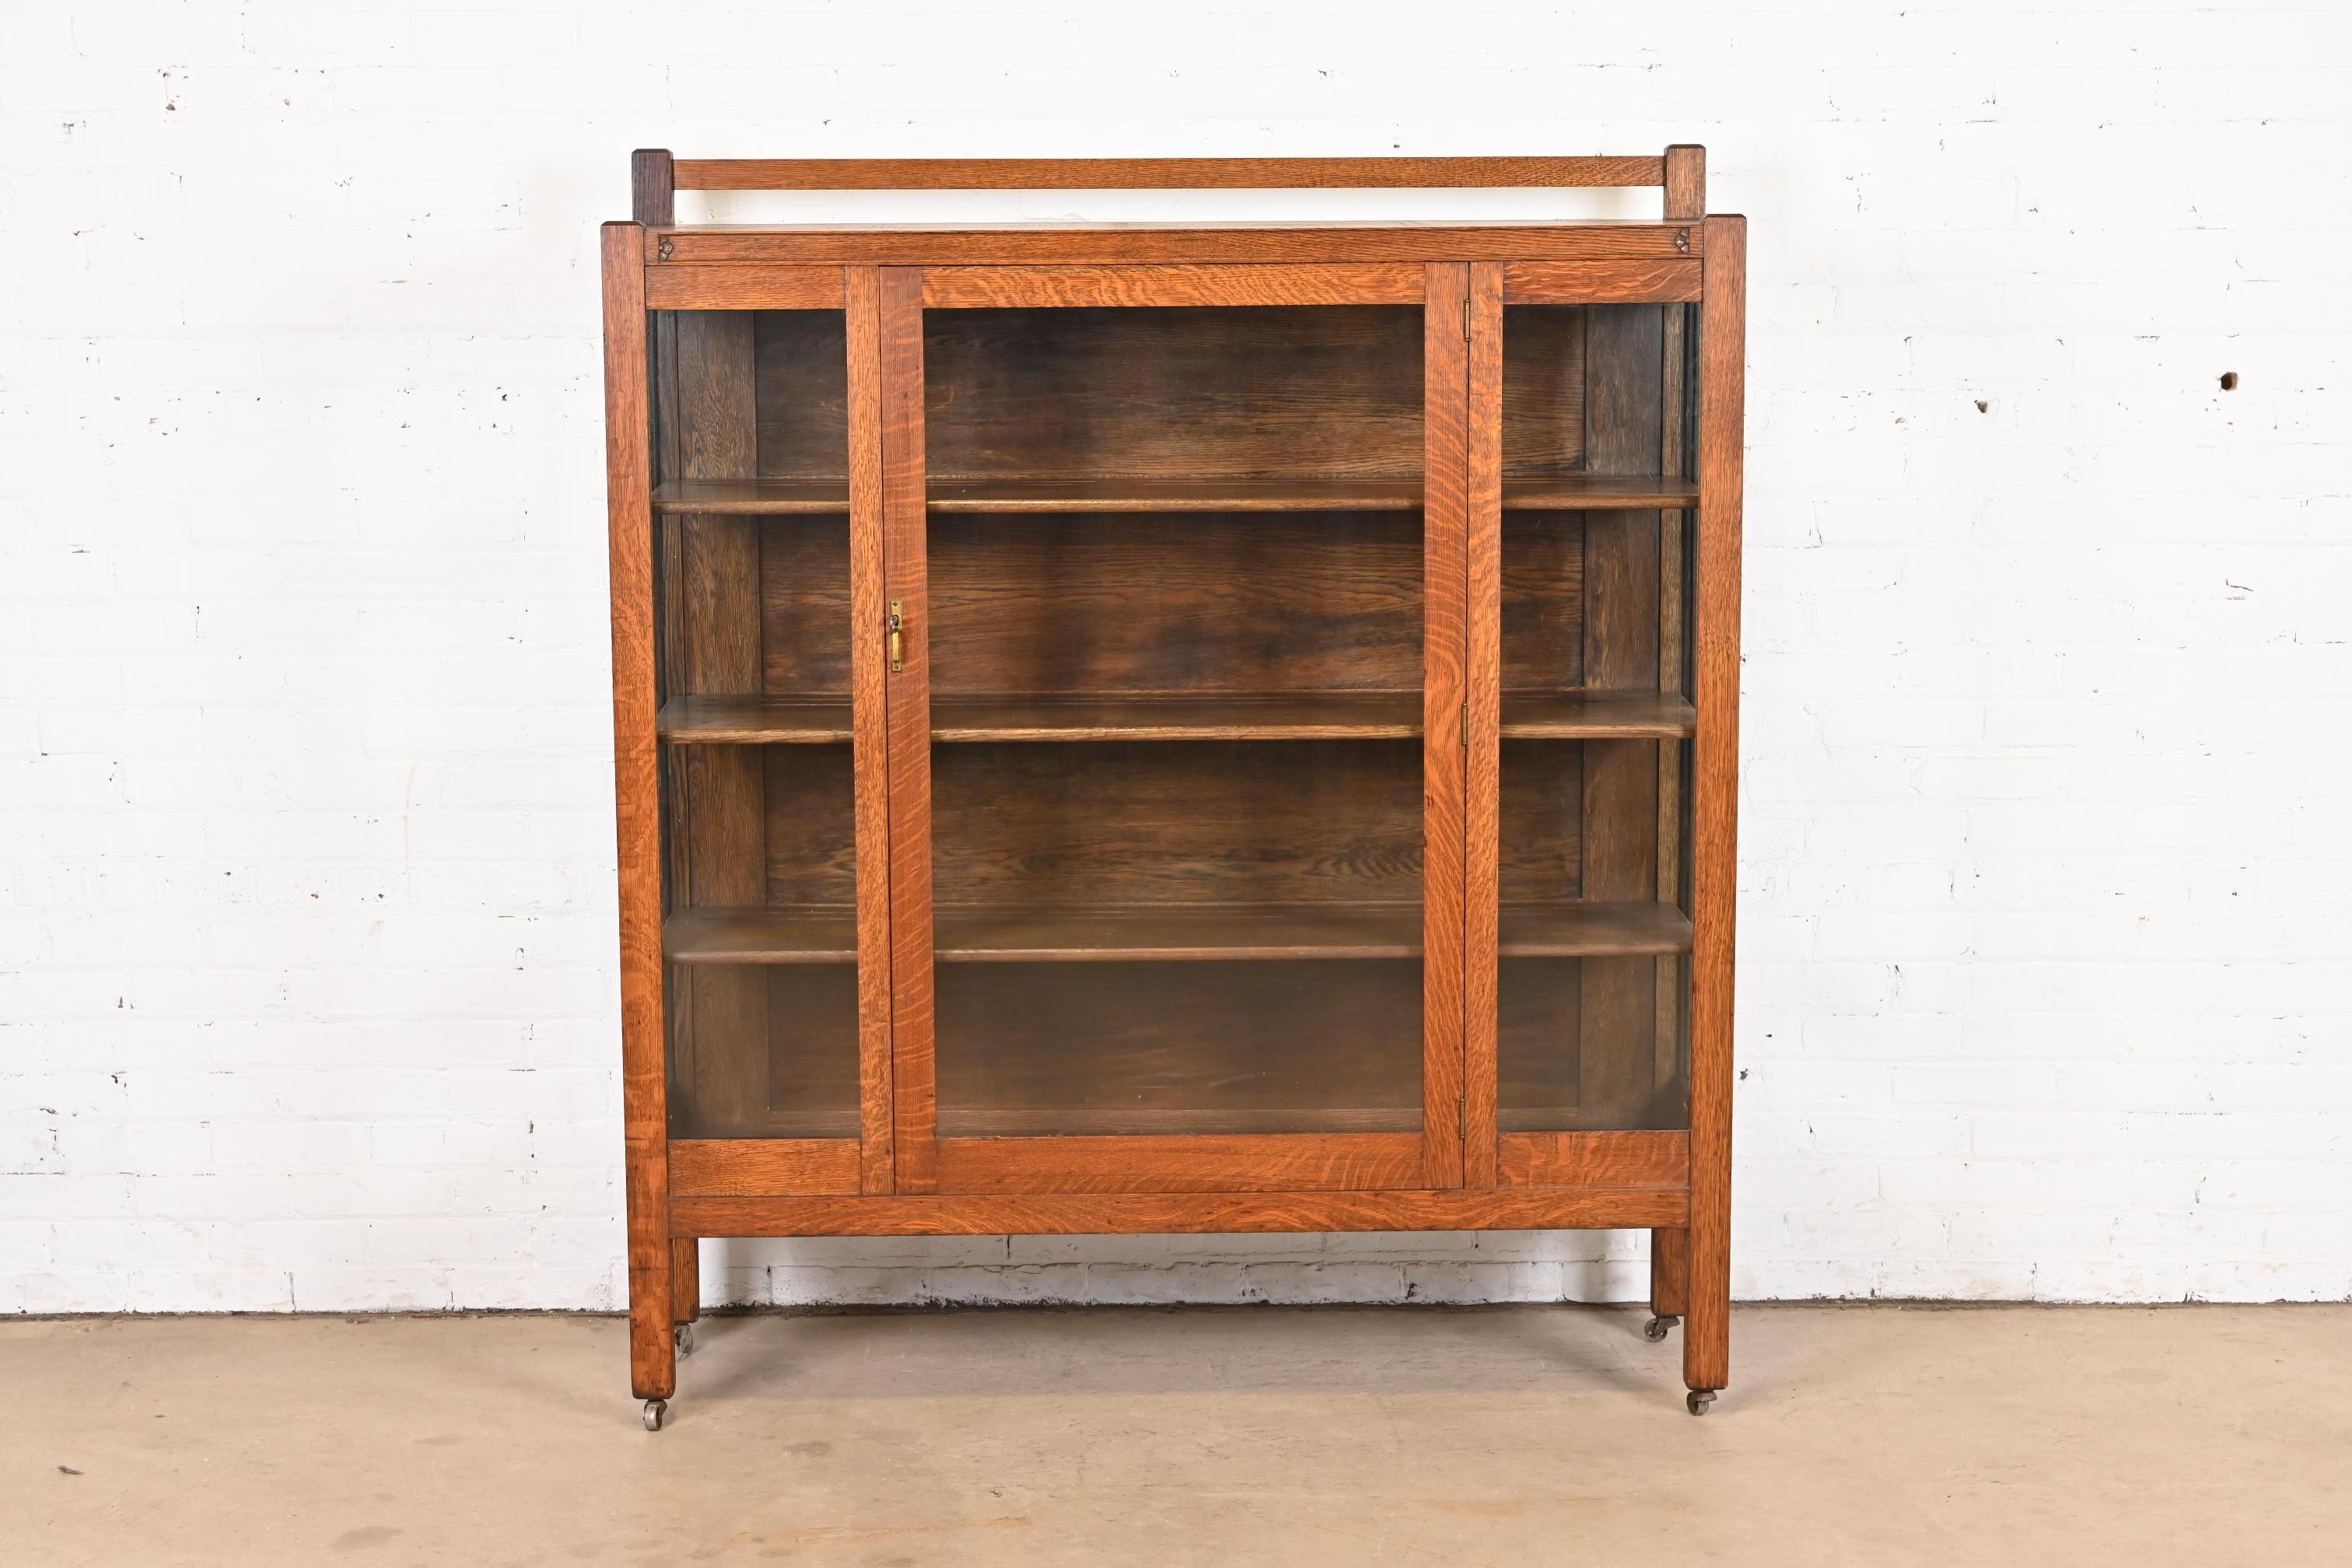 A gorgeous antique Mission or Arts & Crafts bookcase or display cabinet

In the manner of Stickley Brothers

USA, Circa 1900

Carved quarter sawn oak, with glass front doors and sides, and original brass hardware. Cabinet locks, and key is